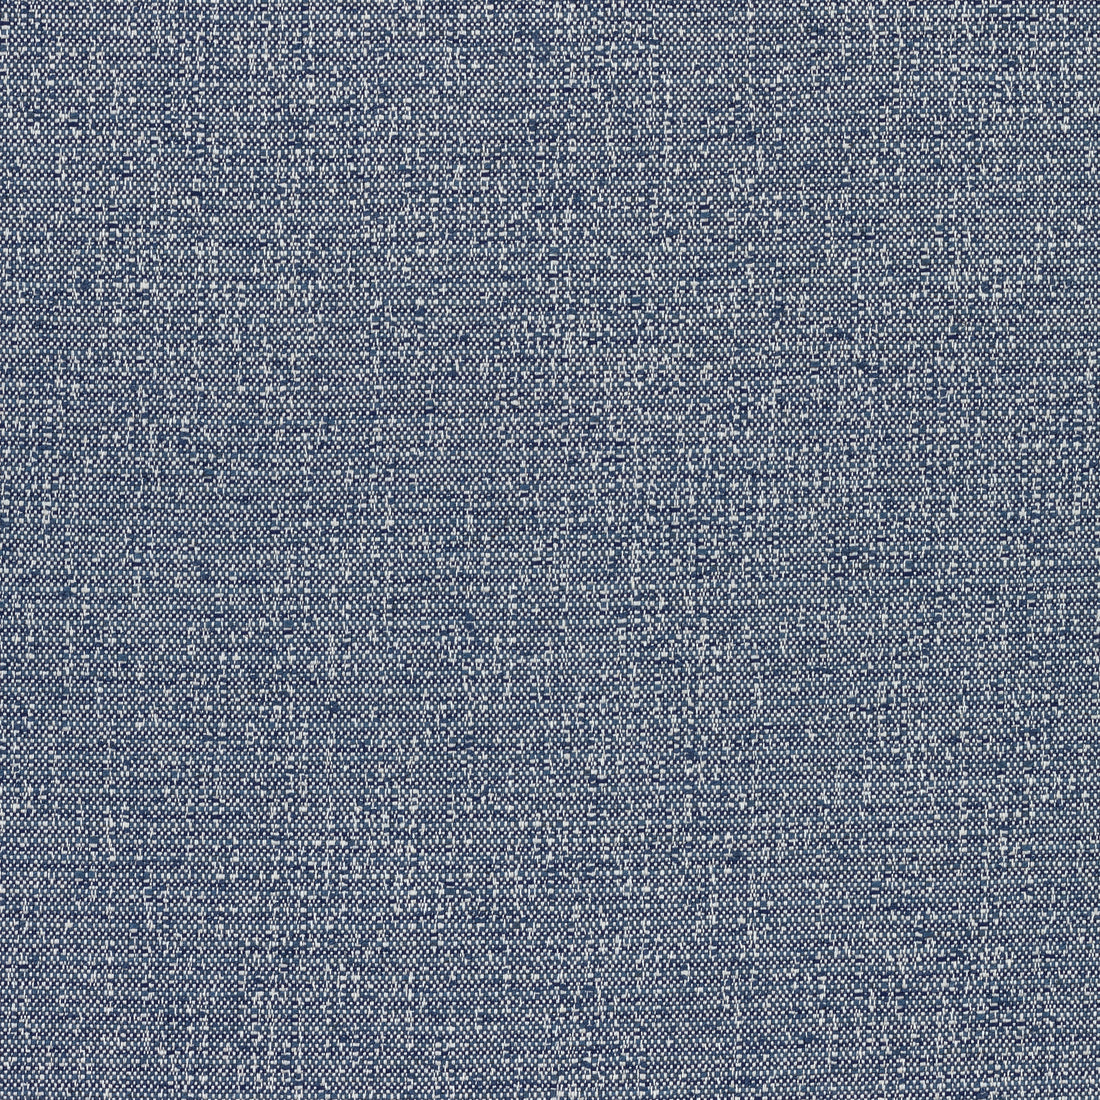 Everly fabric in navy color - pattern number W74059 - by Thibaut in the Cadence collection